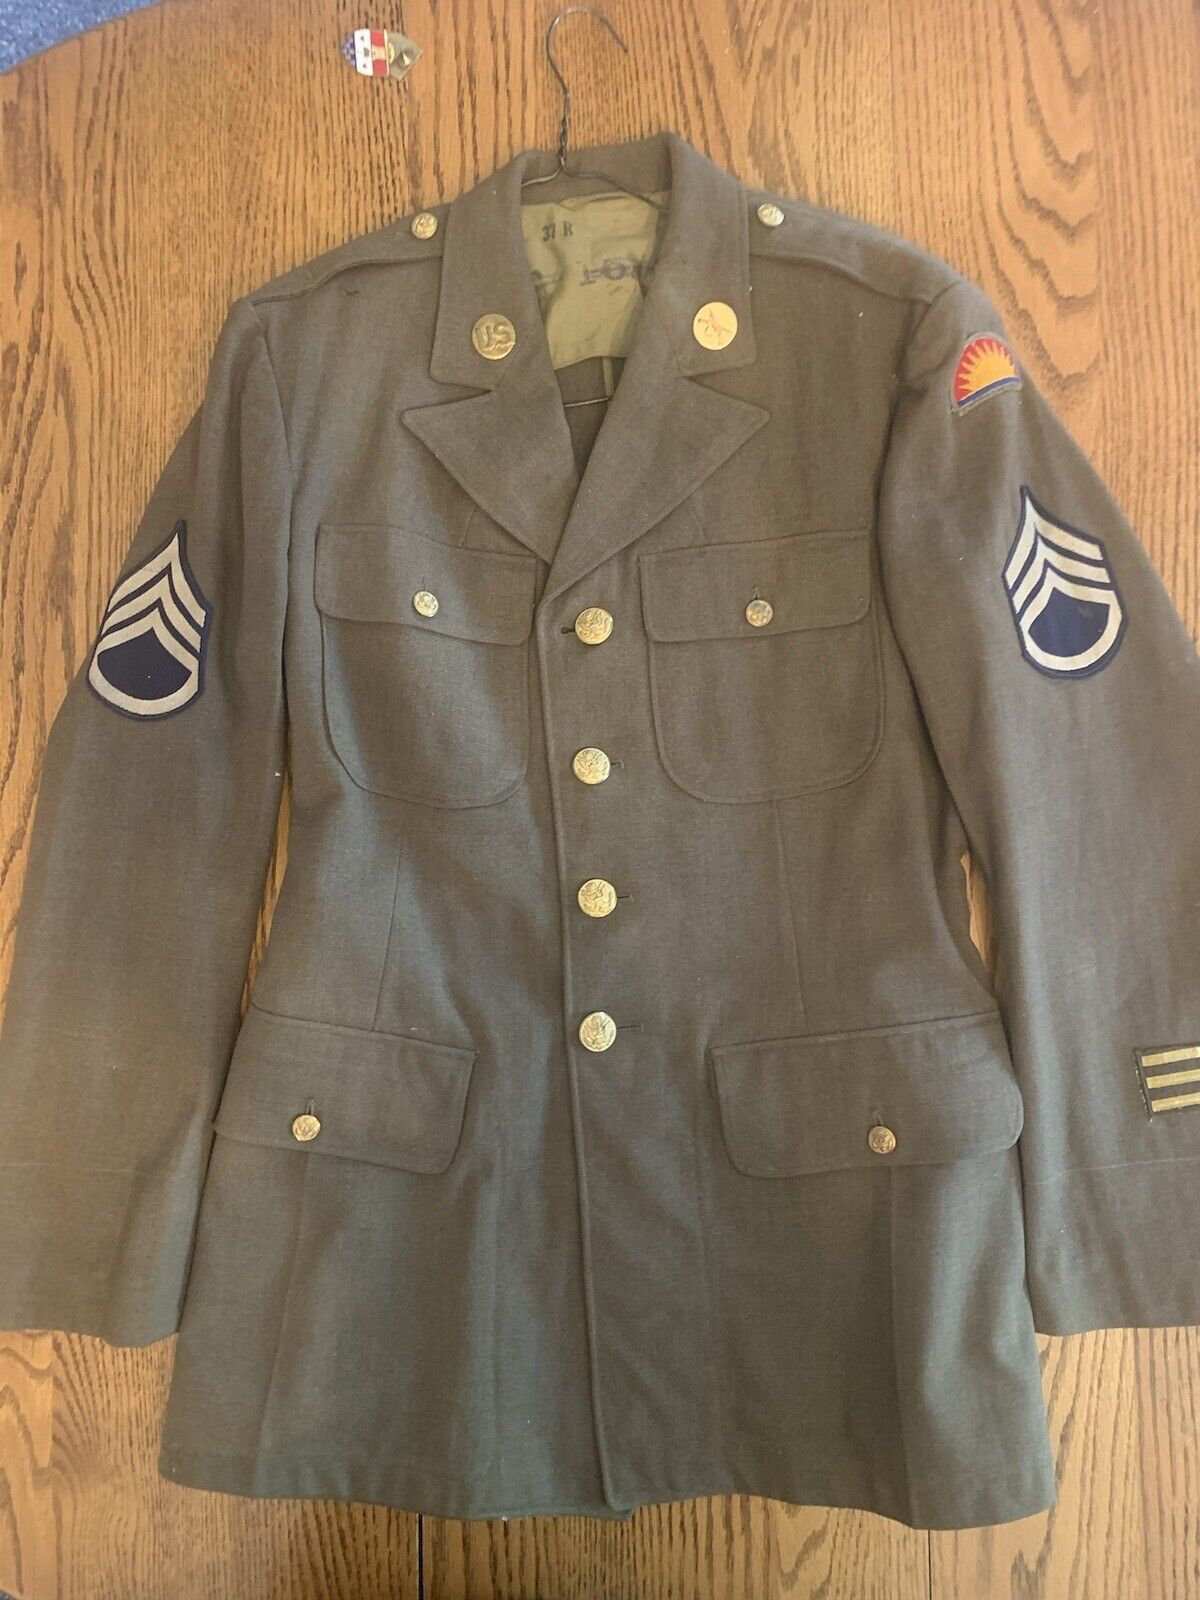 WWII Enlisted Uniform Jacket With SGT Insignia/41st Division Patch